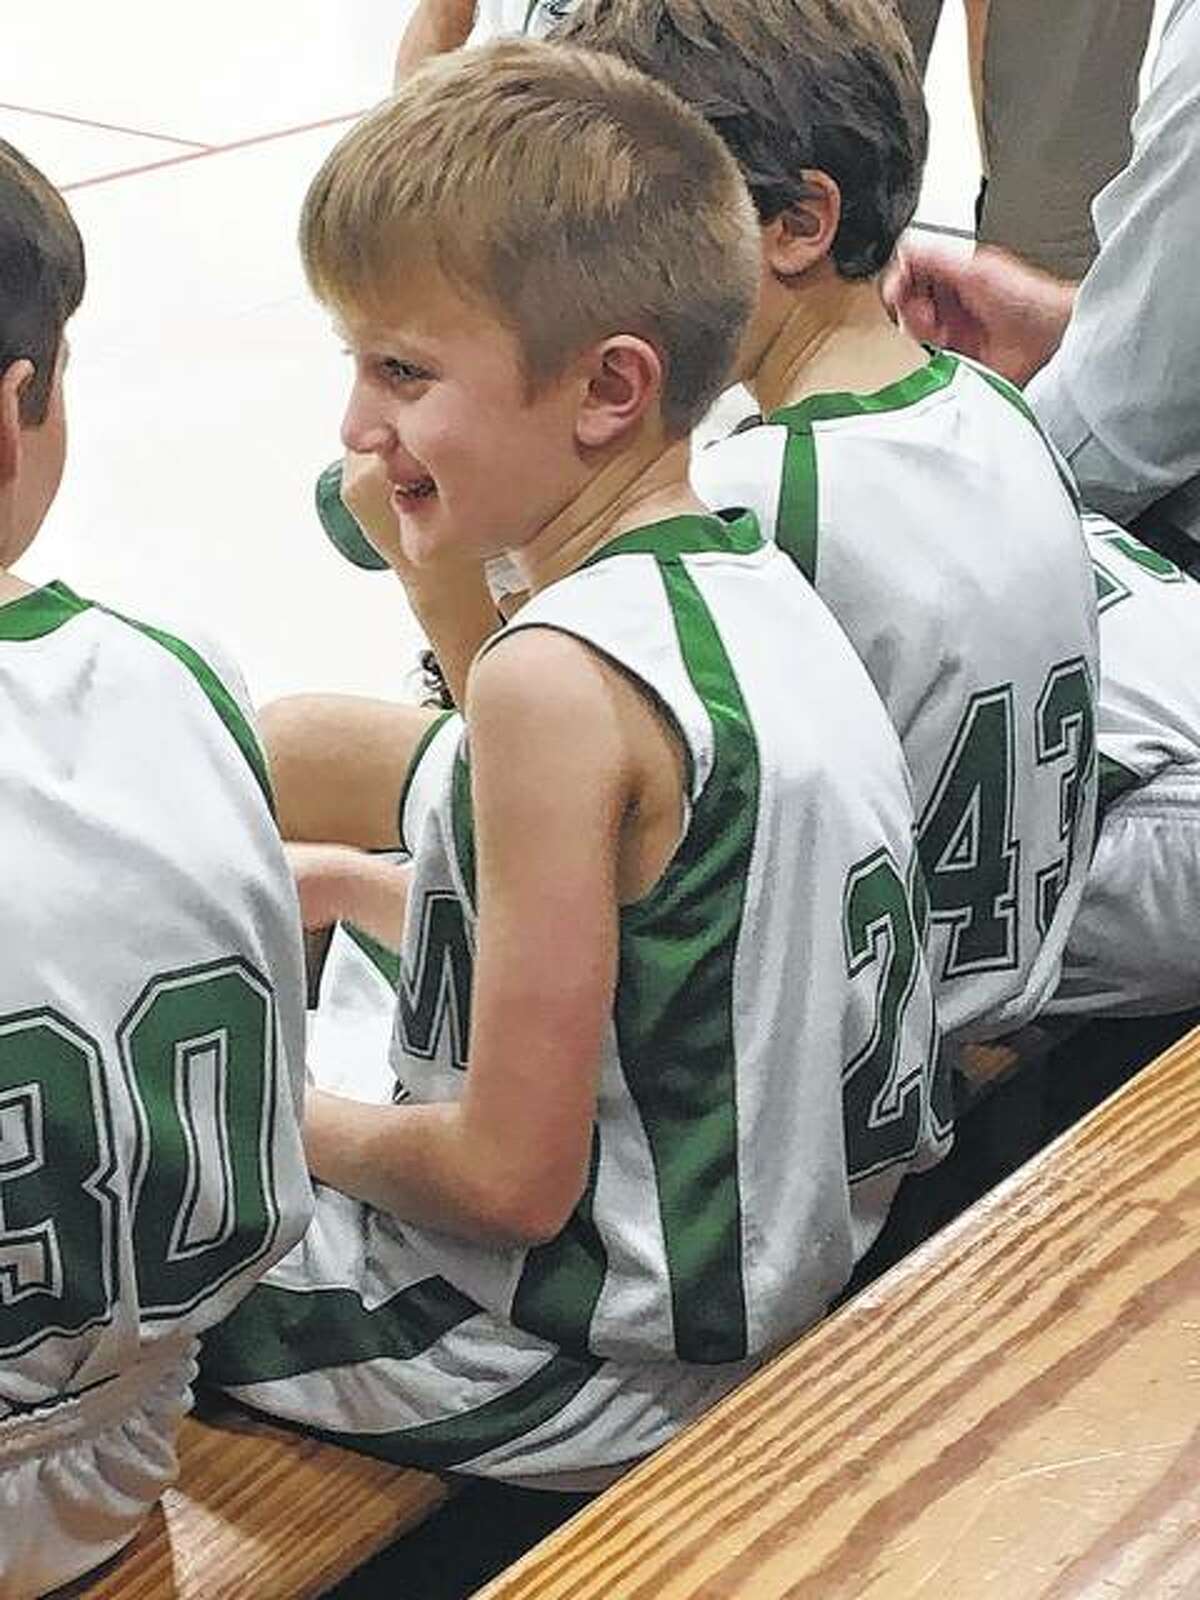 Salem Lutheran School players wait for the start of a basketball game.